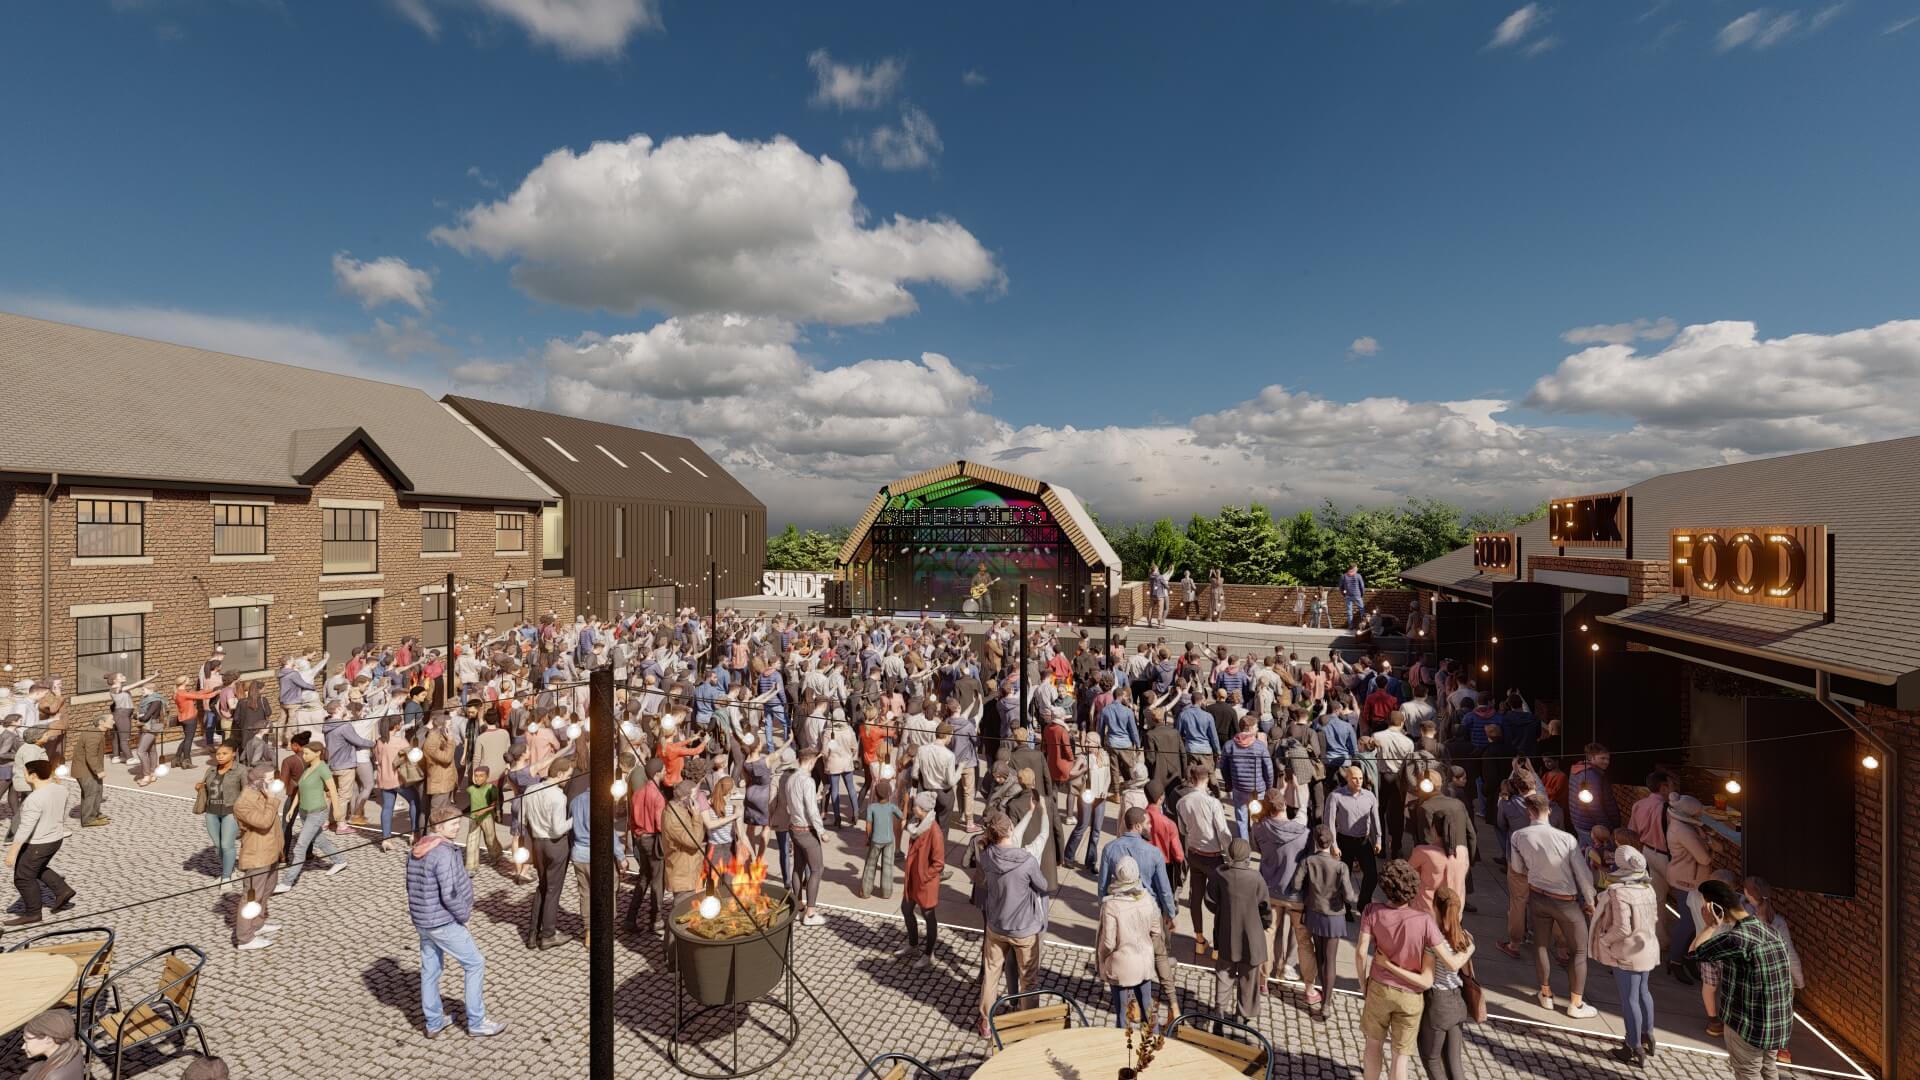 Planning Application Submitted for New City Venue